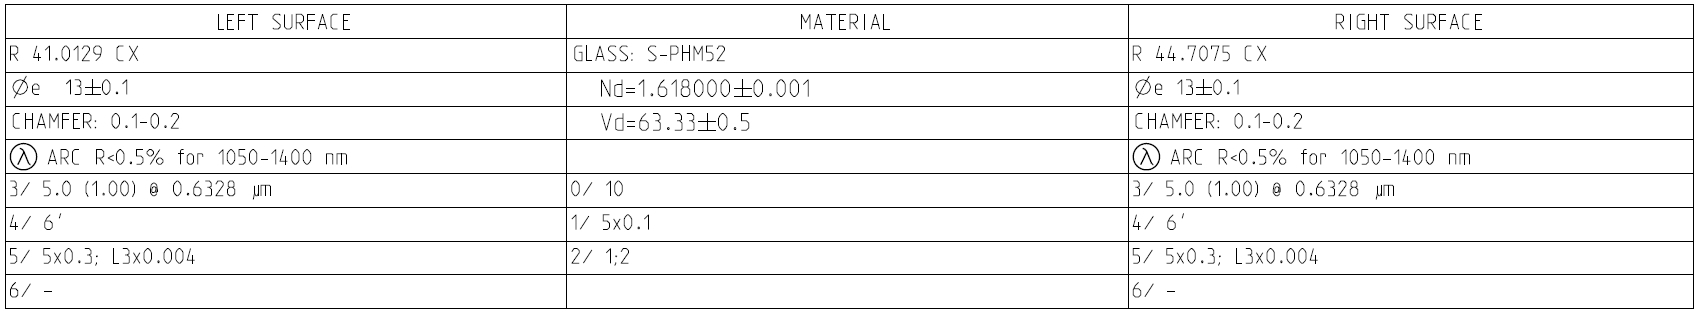 Requirements for the surface column and requirements for the optical element material column